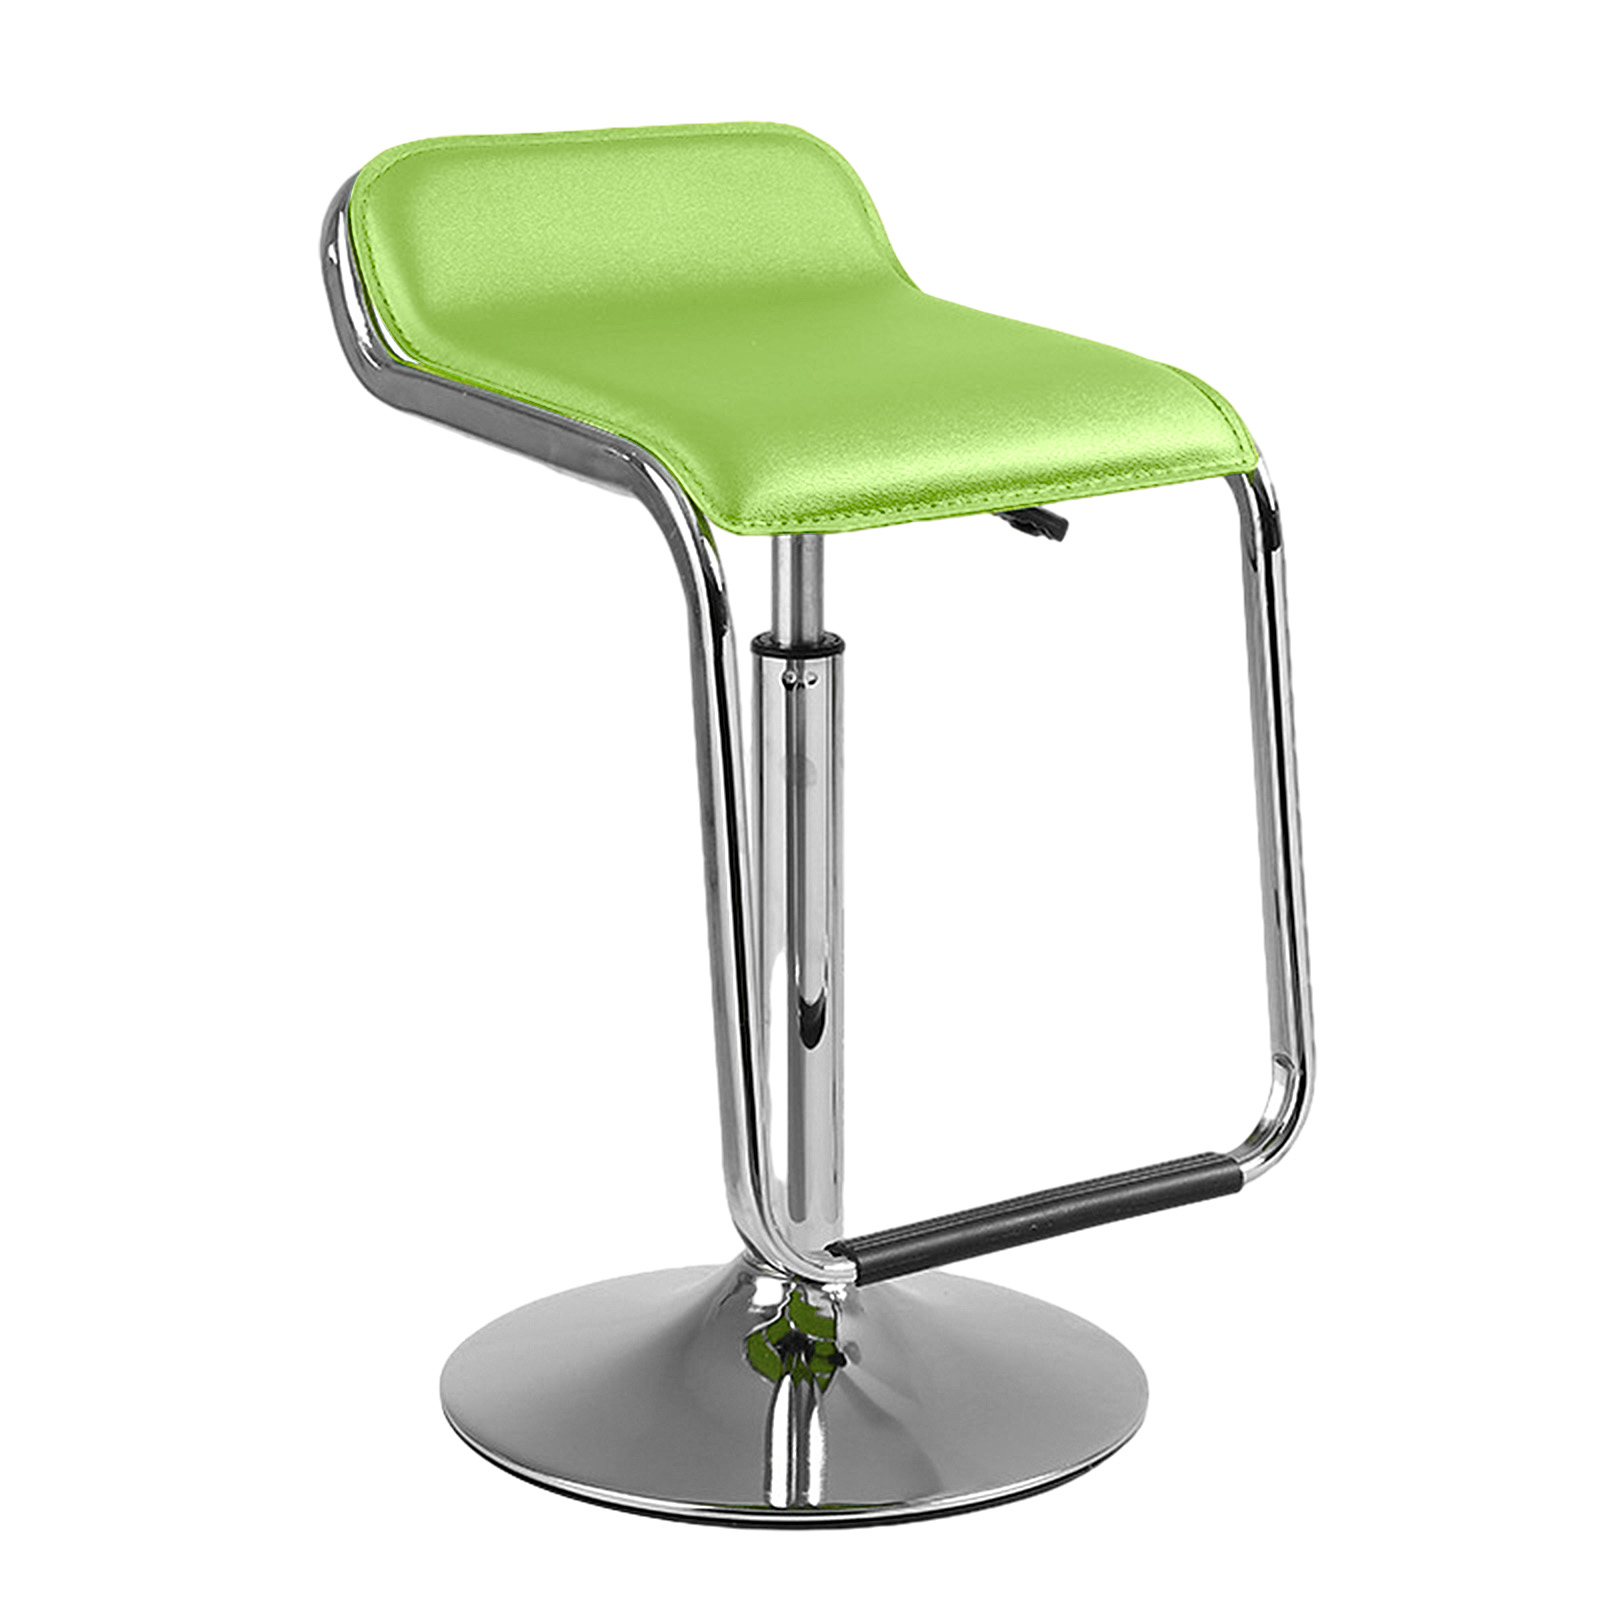 S chair round drag - Fruit green